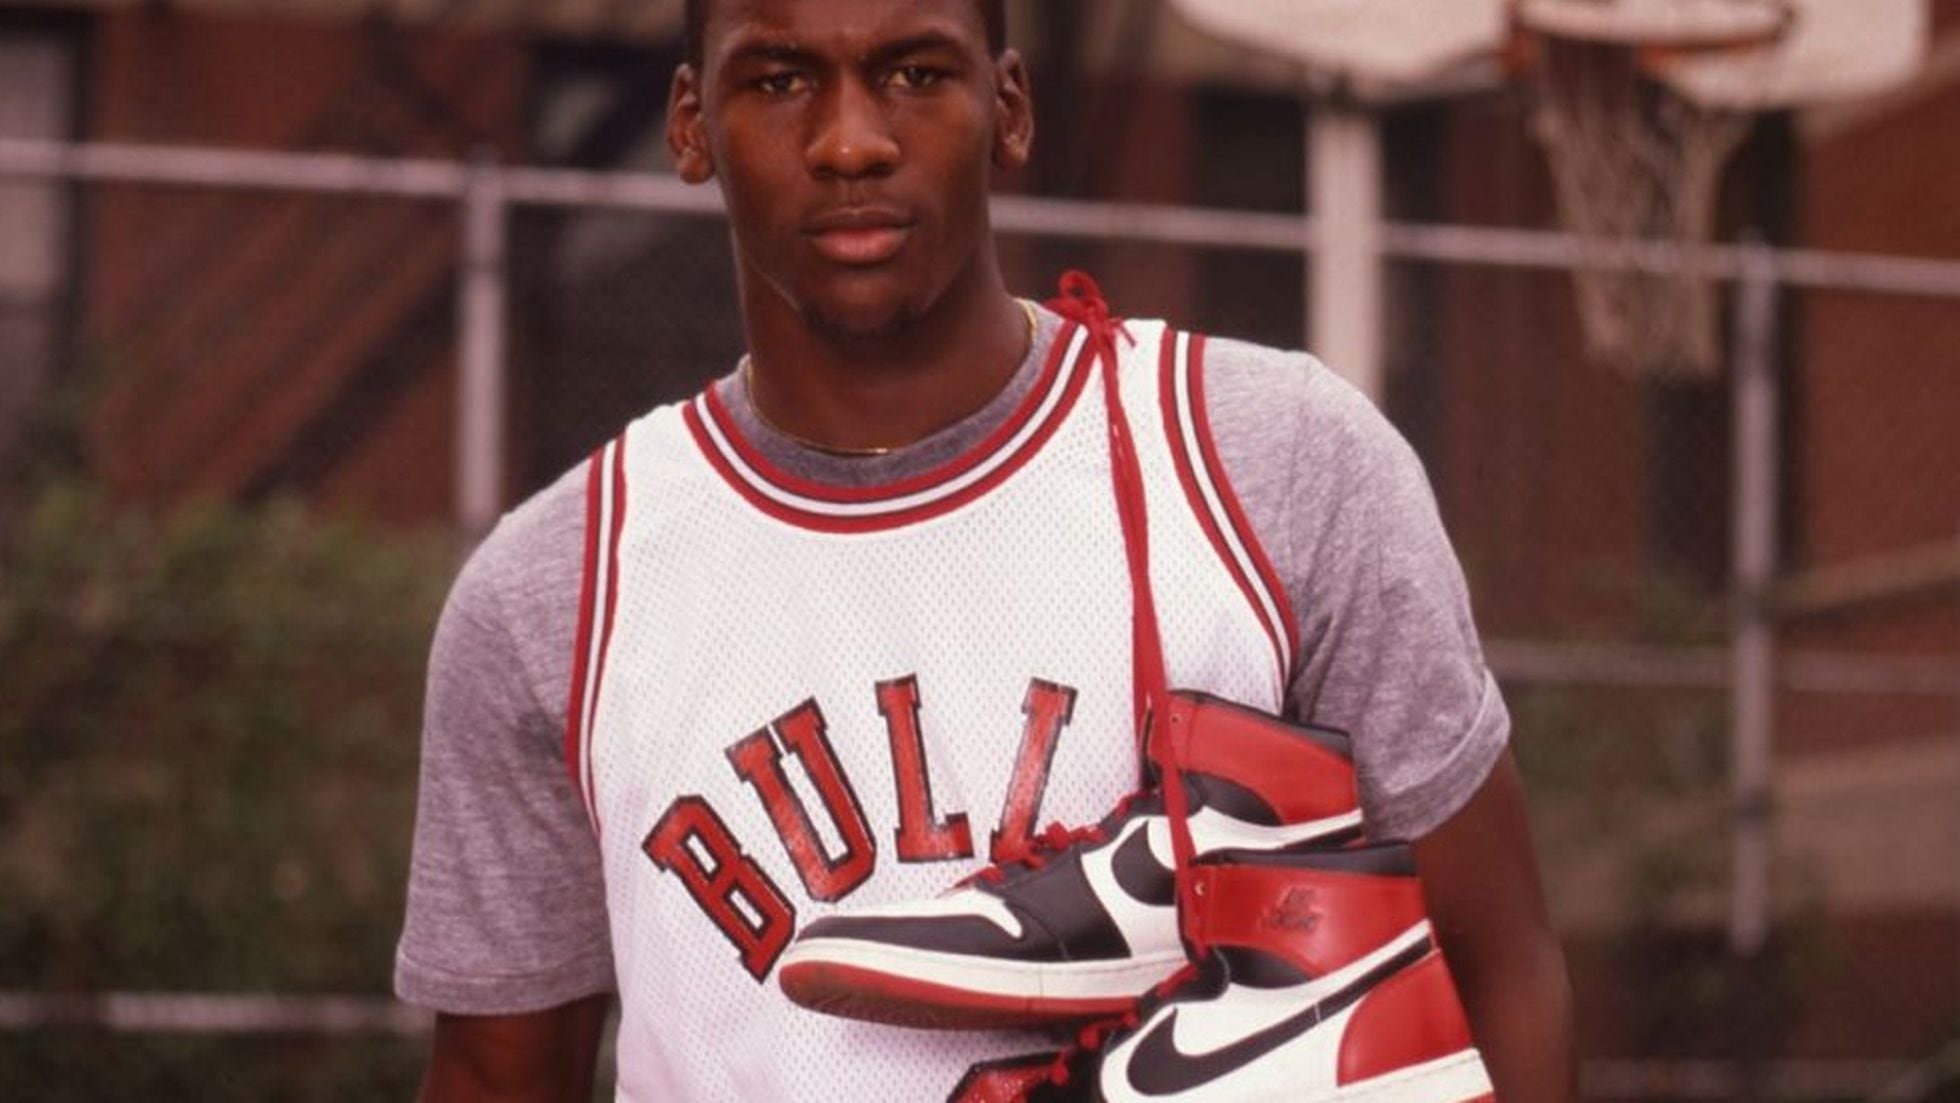 The day Michael Jordan's mother Nike's history forever: 'Even if you don't like it, you're going to listen to them' | Culture | EL PAÍS English